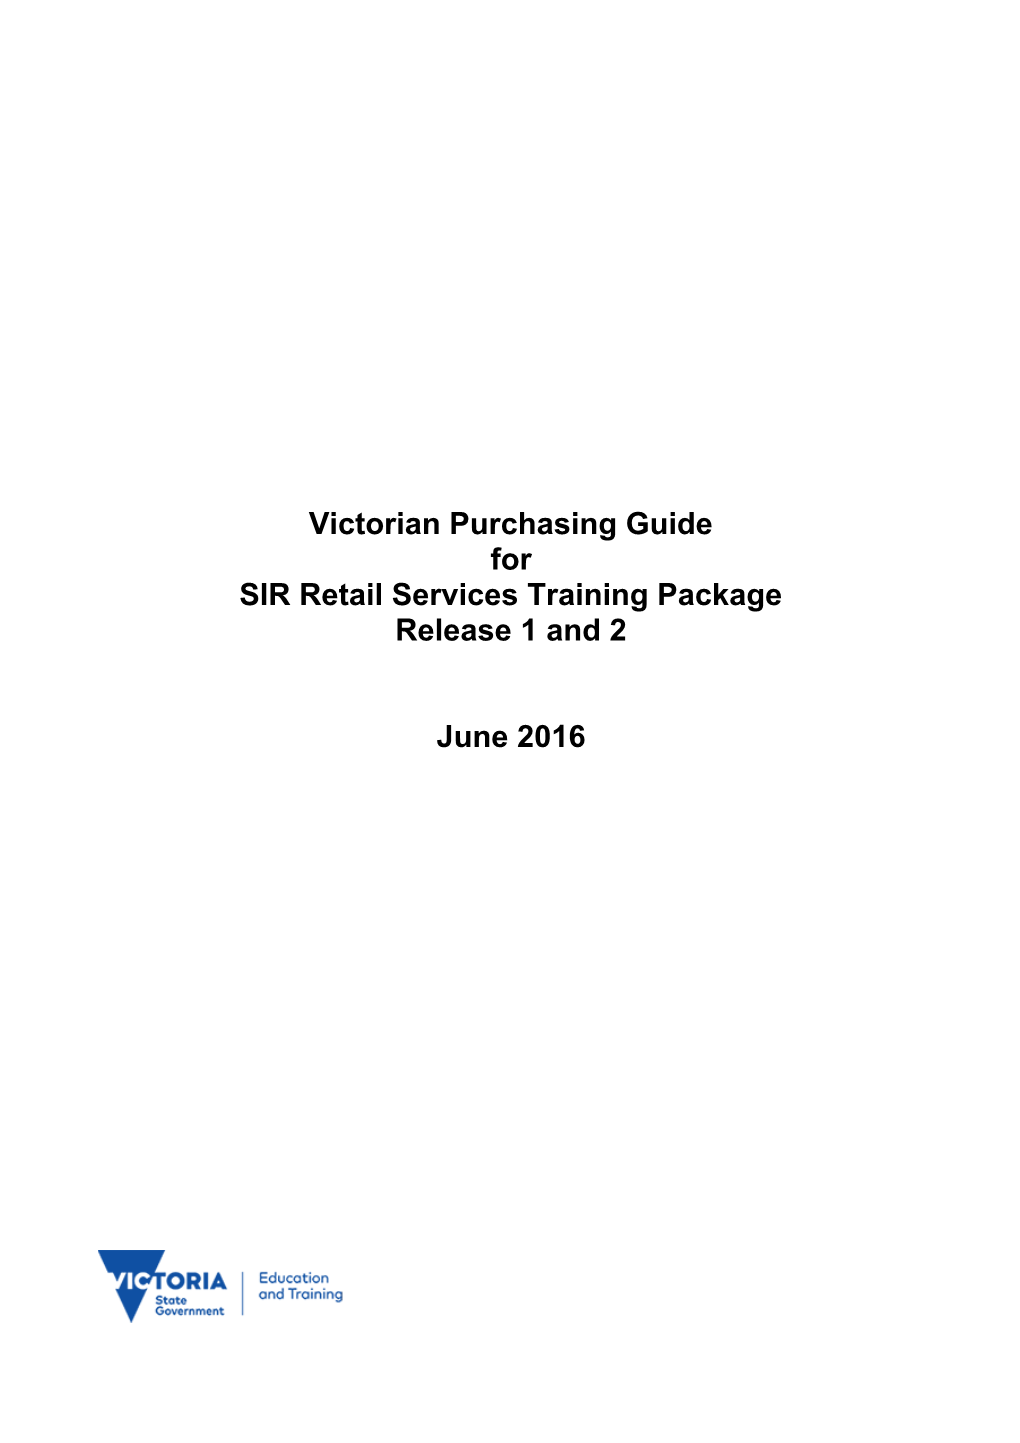 Victorian Purchasing Guide for SIR Retail Services